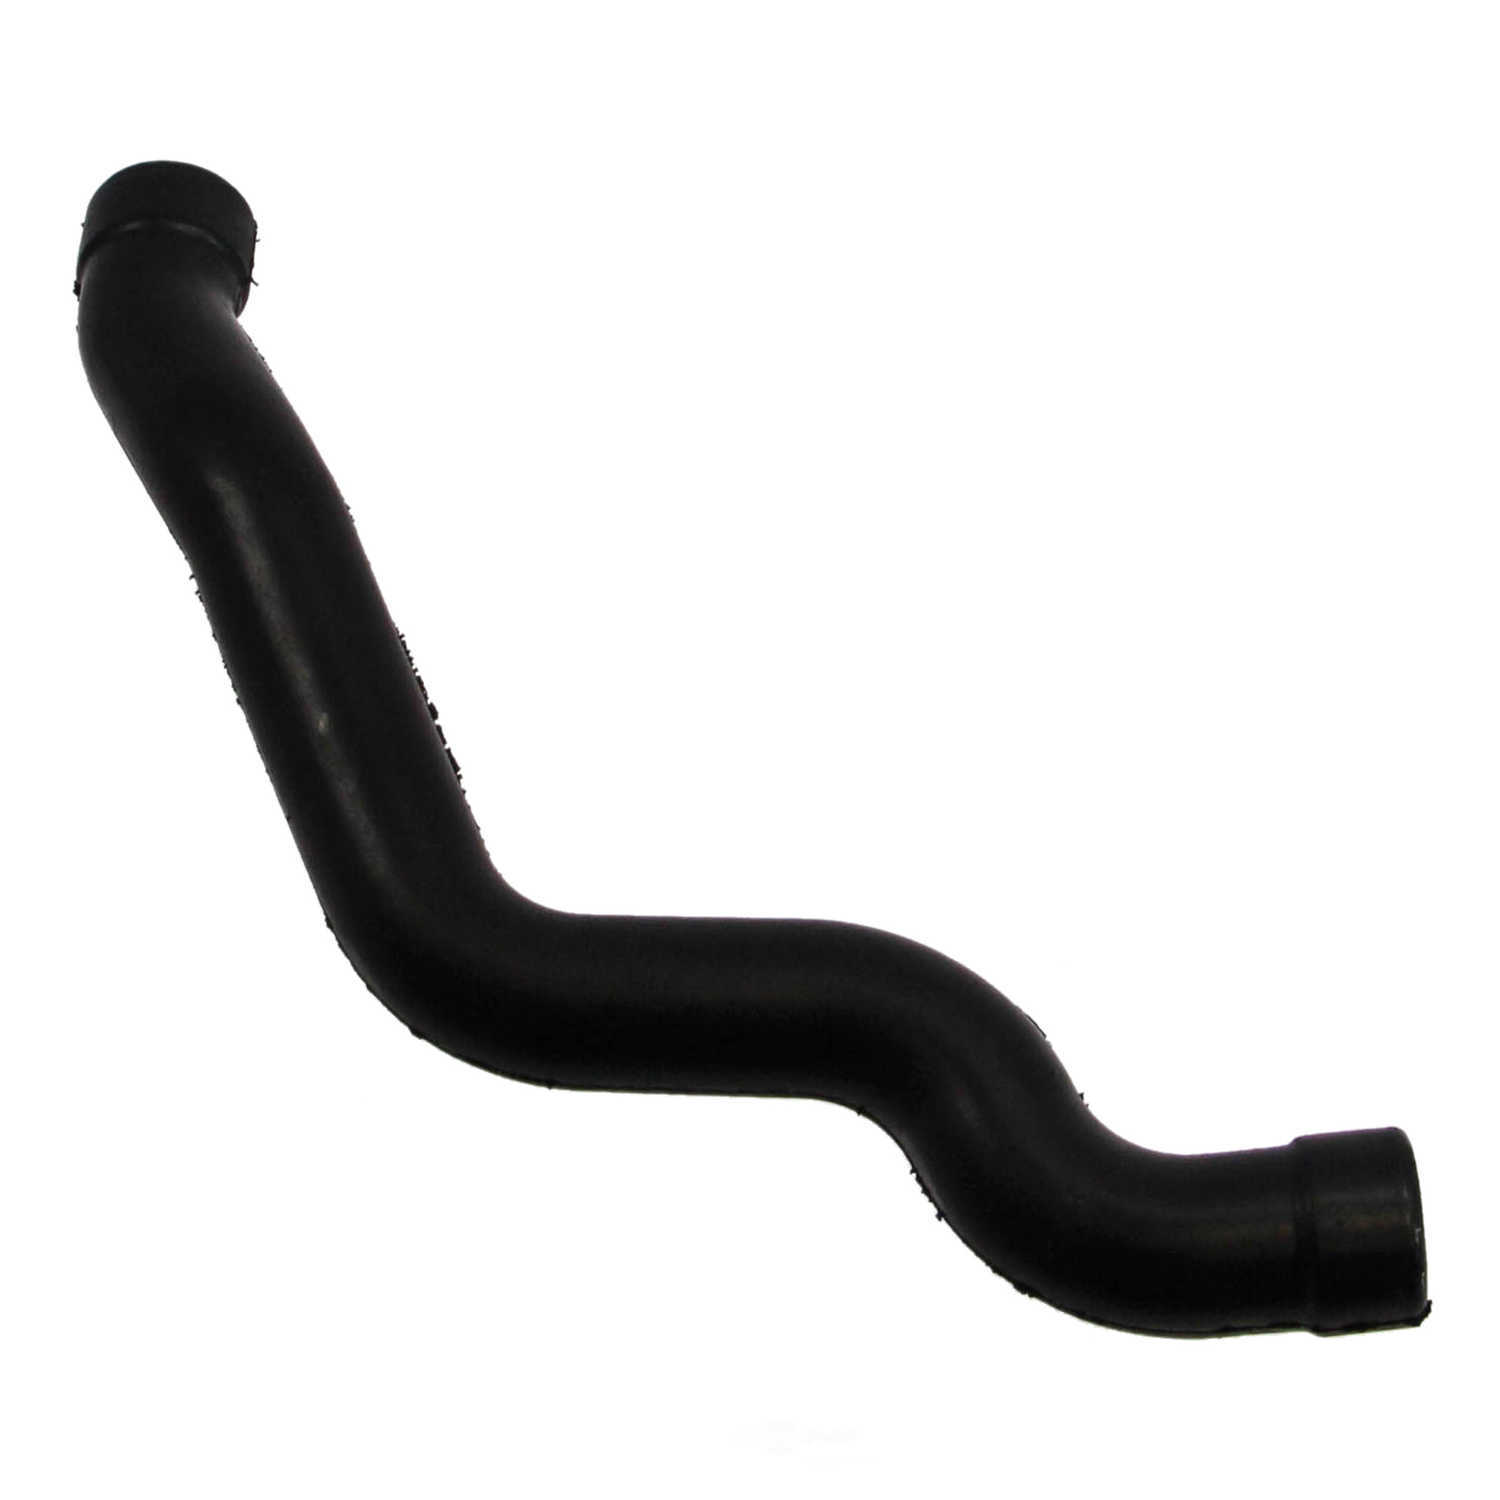 CRP/REIN - Engine Crankcase Breather Hose (Valve Cover (Left) To Air Intake) - CPD ABV0108